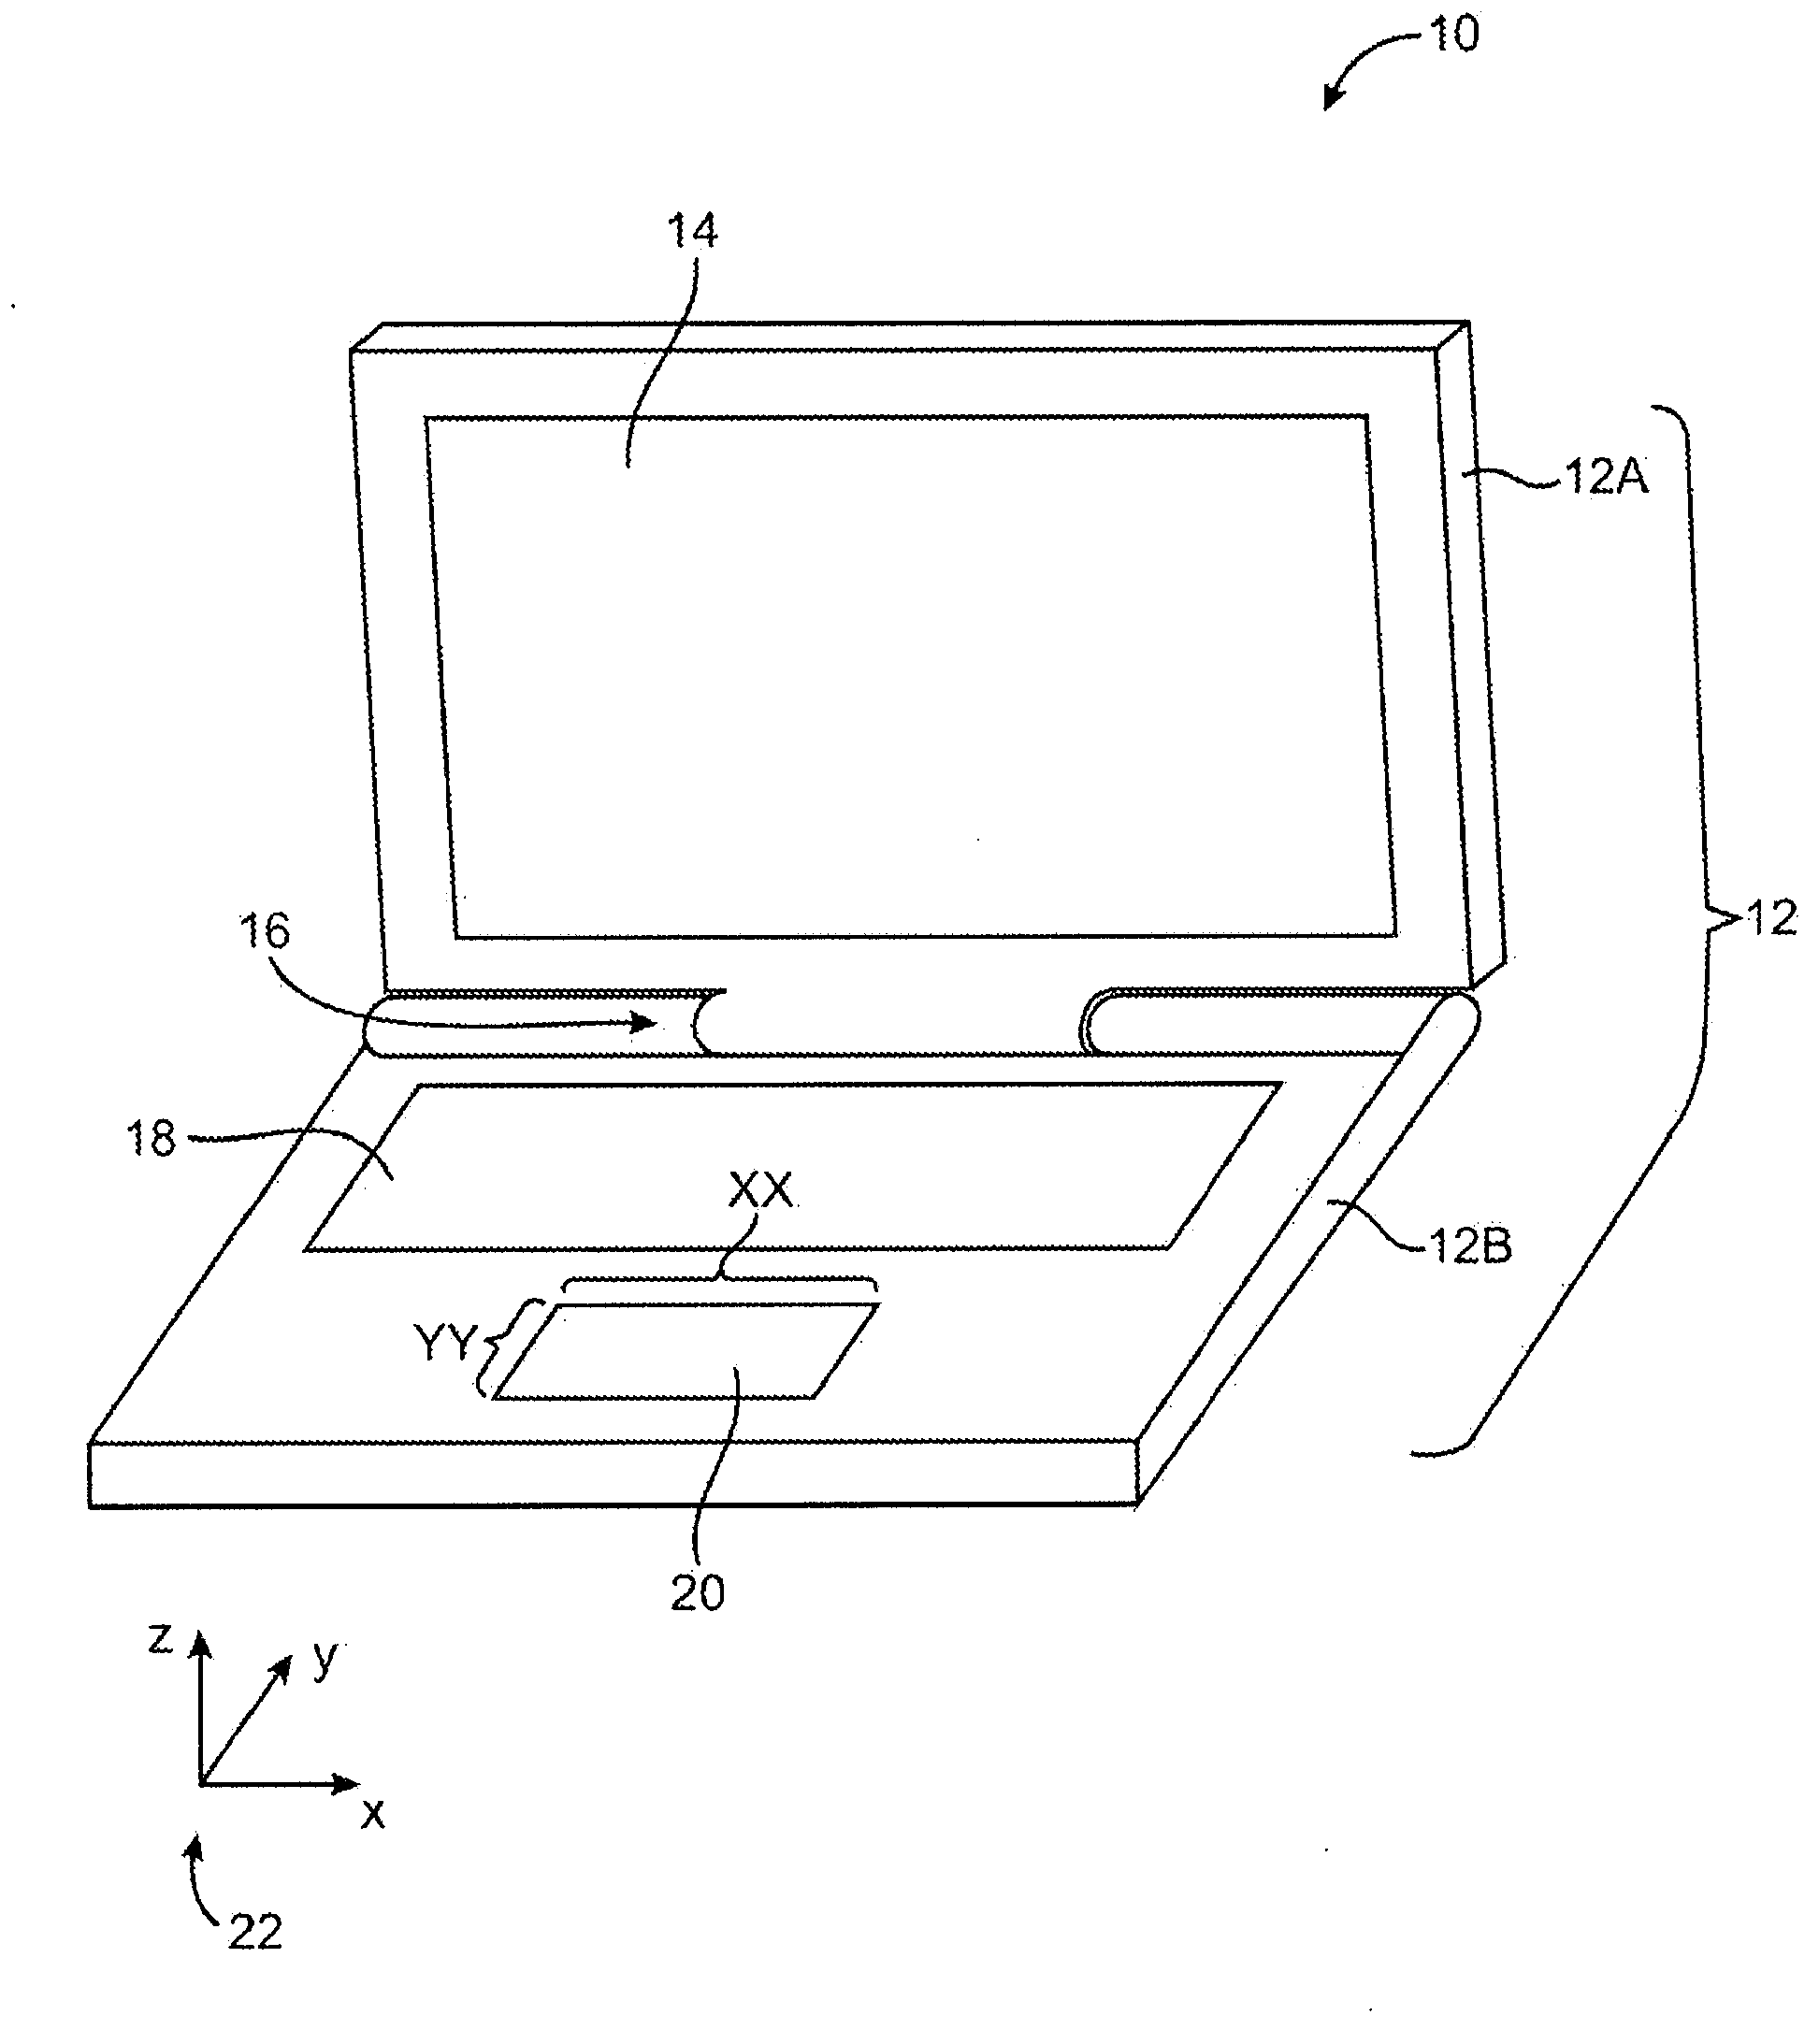 Touch pad with force sensors and actuator feedback